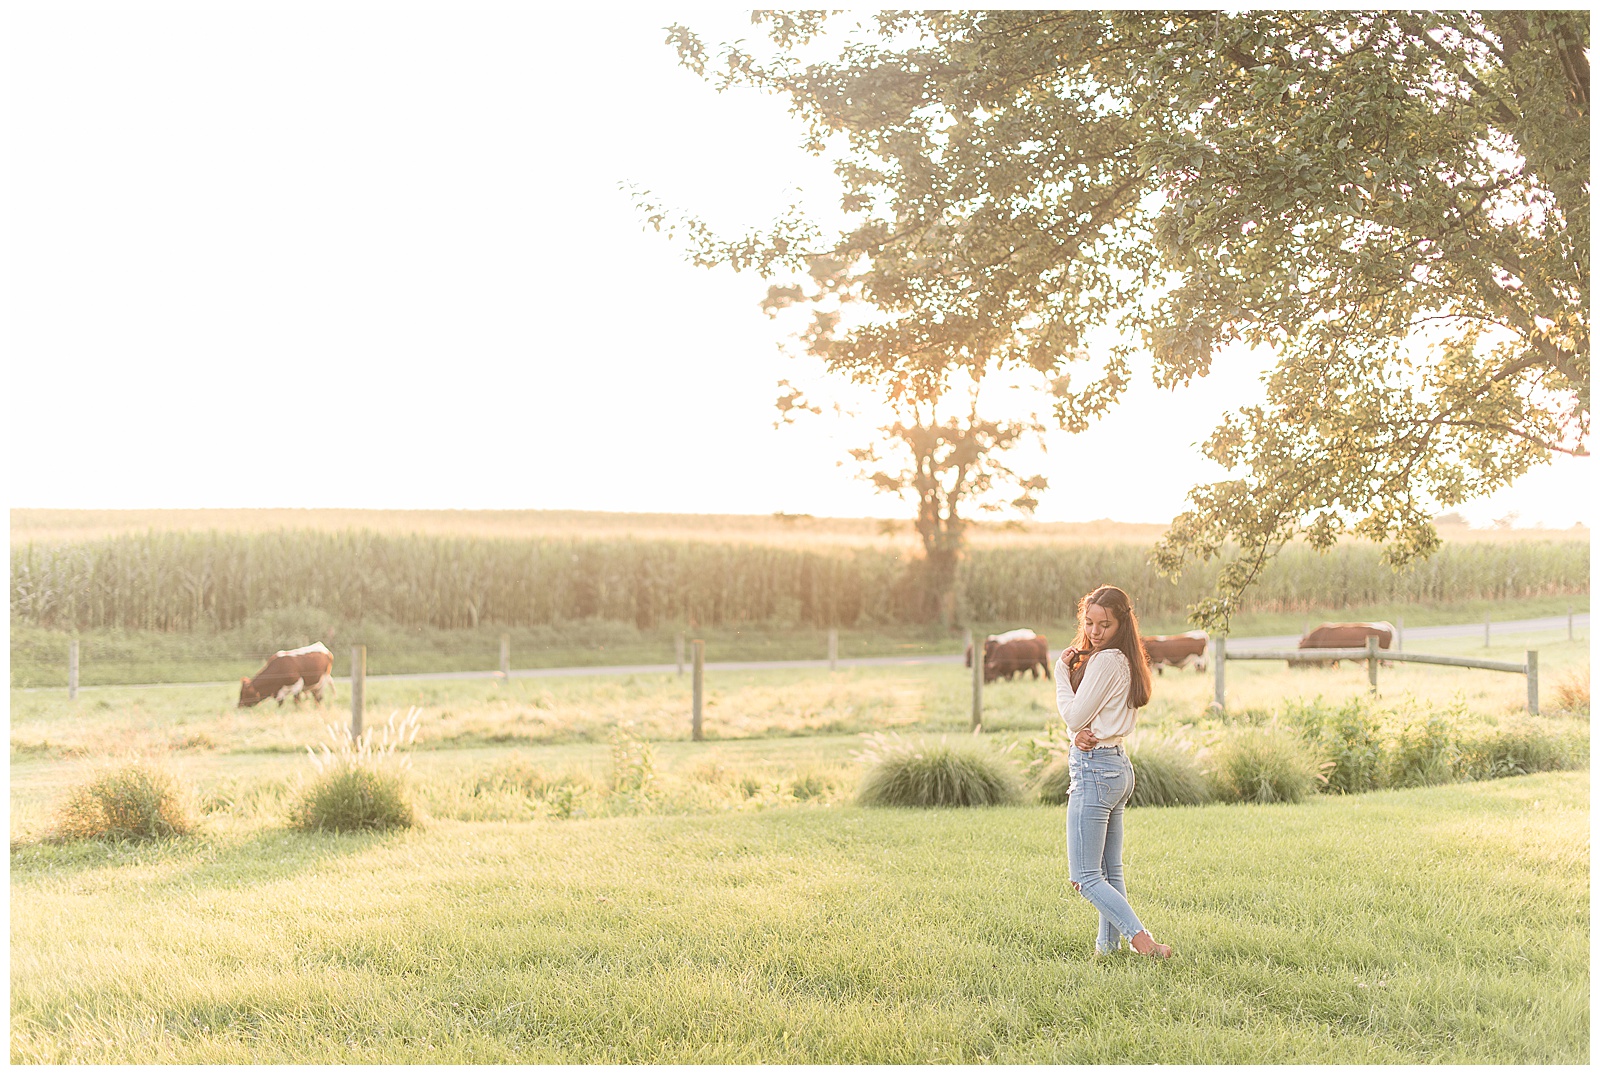 senior standing beside cow pasture with cows grazing behind during sunset